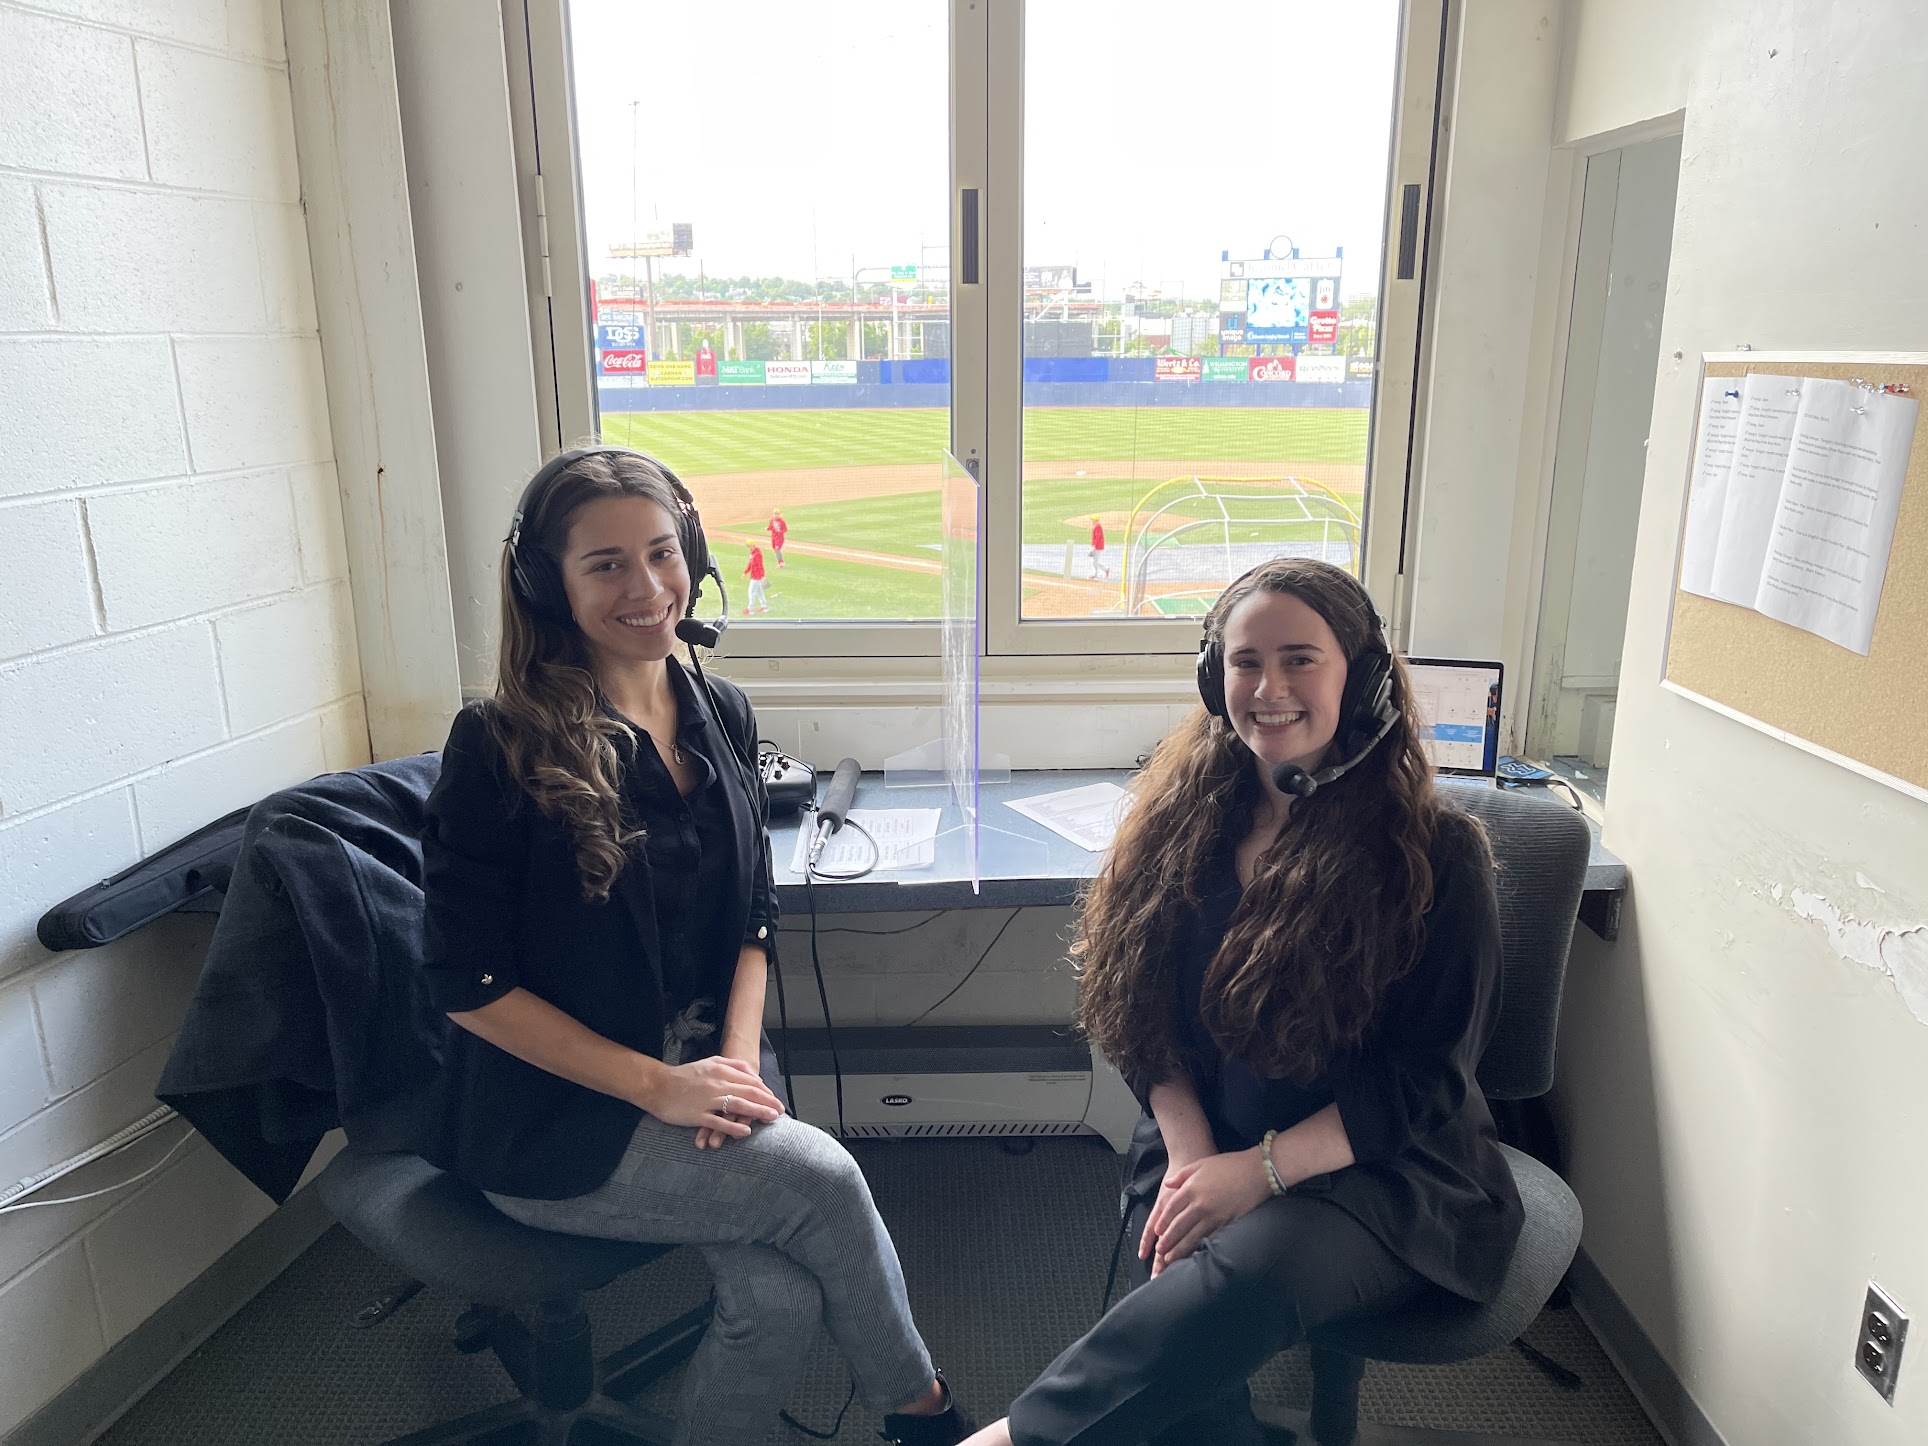 Sports CaM students in announcer box in front of baseball field